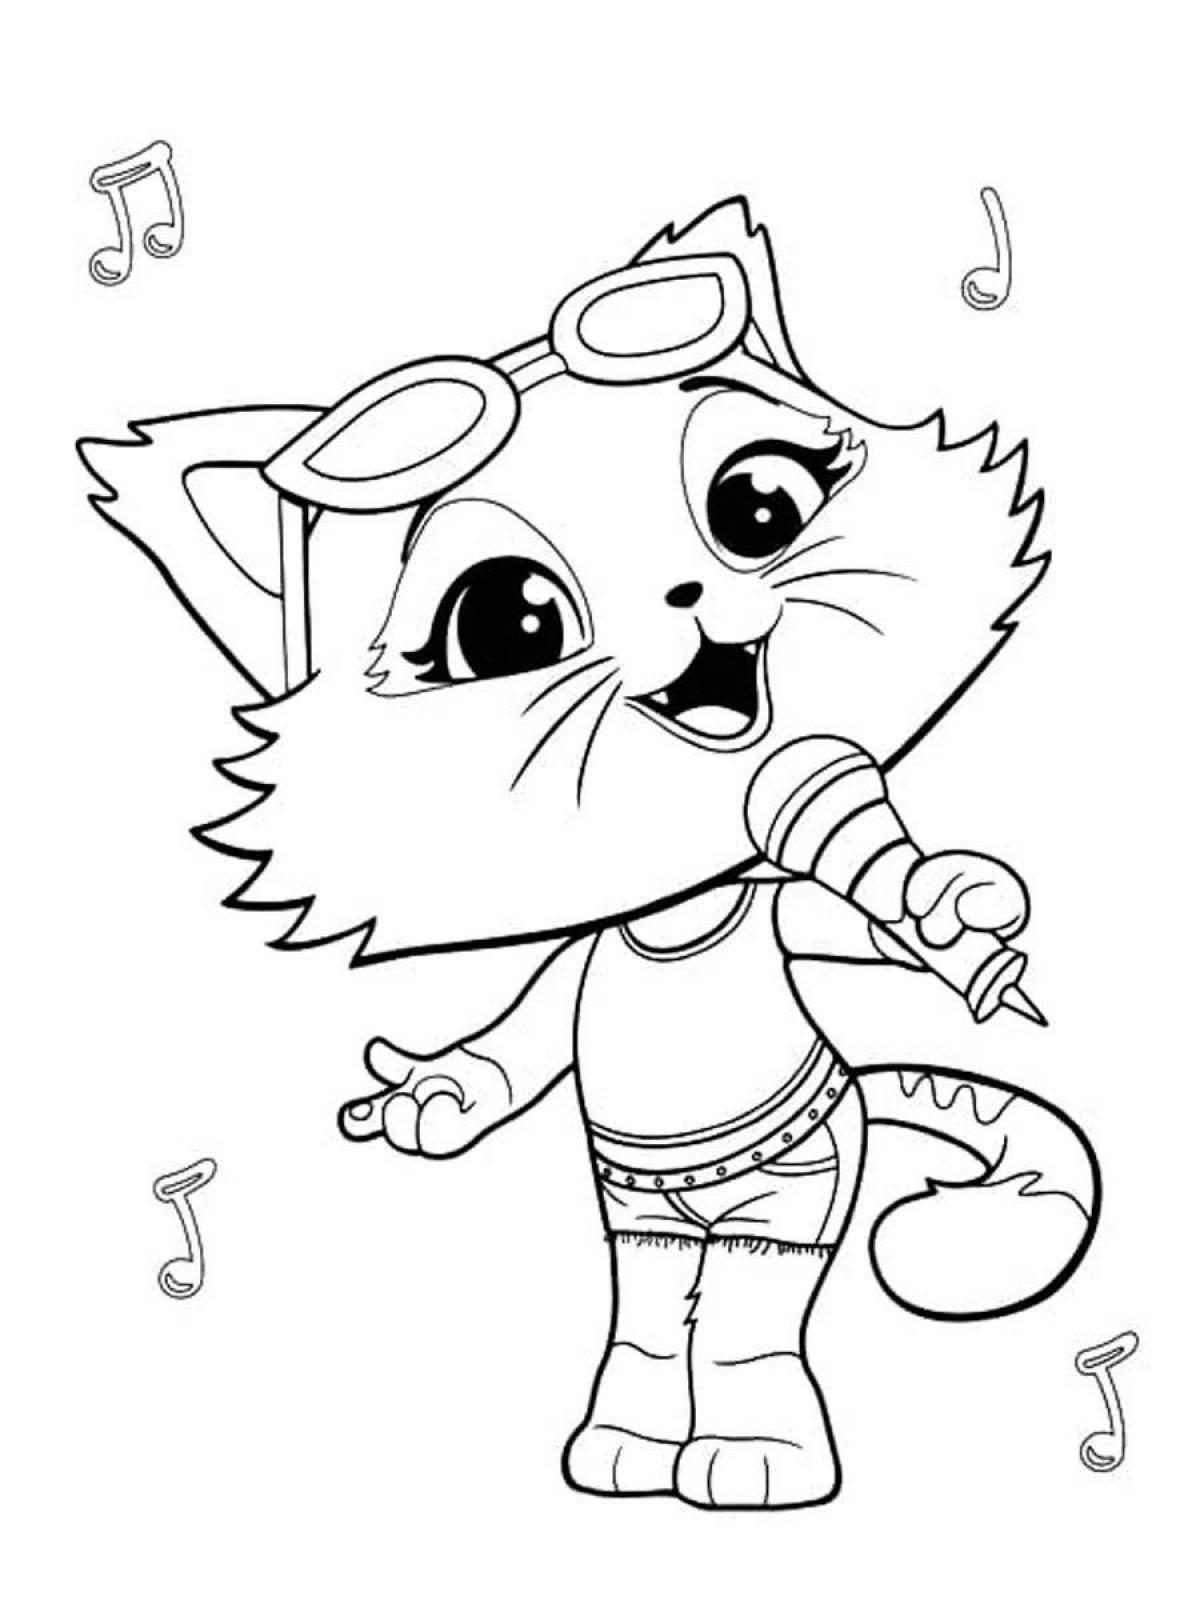 Playful super meow coloring book for kids